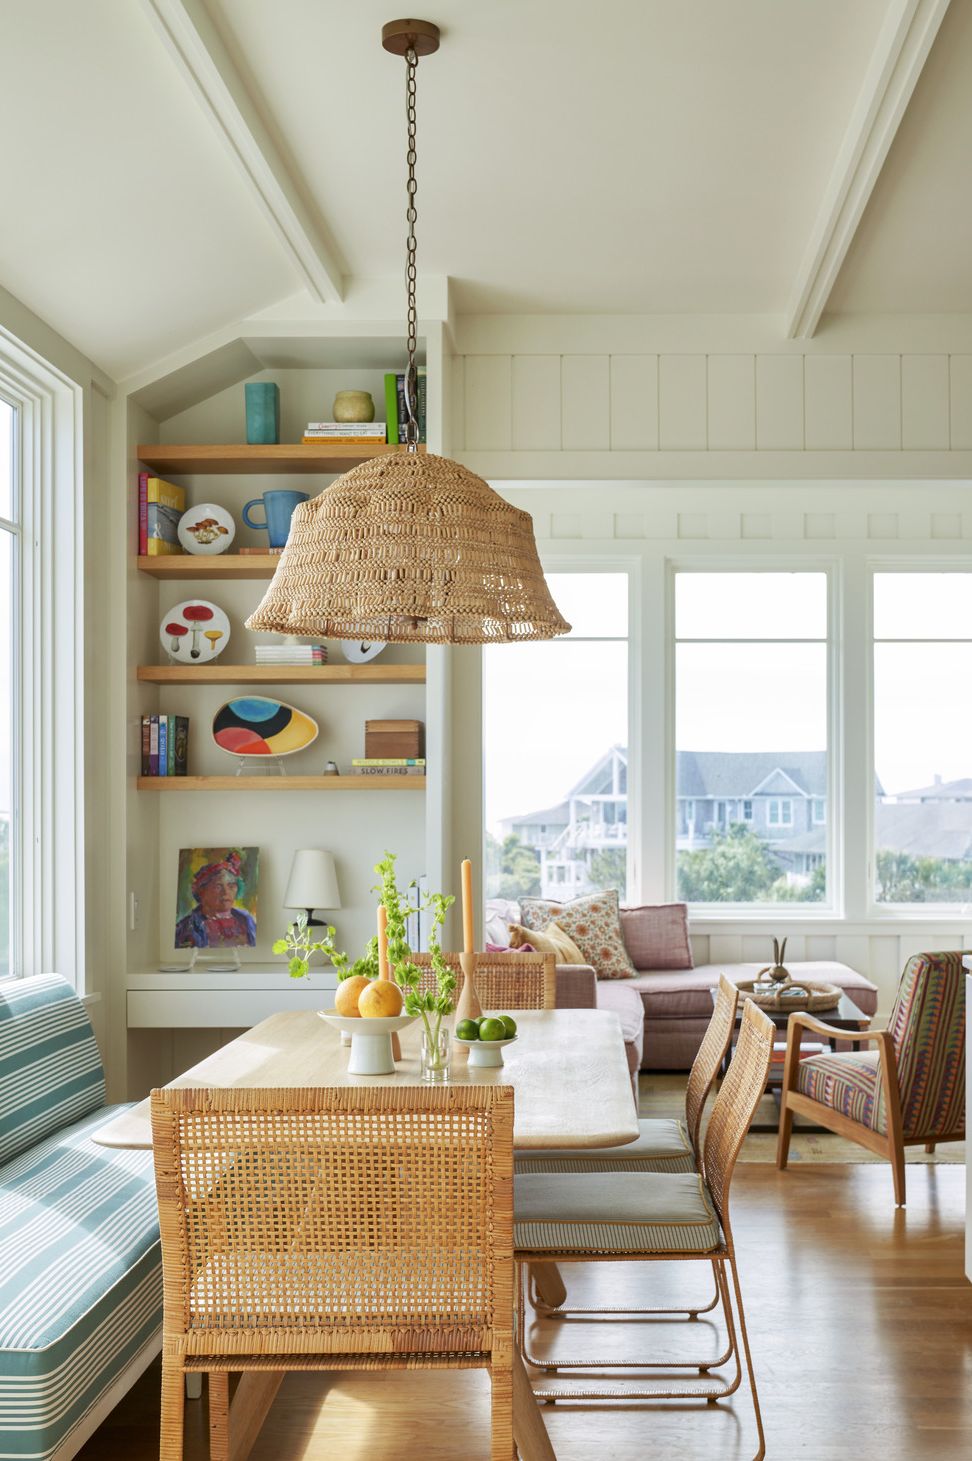 13 Small Dining Room Ideas and Decorating Tricks